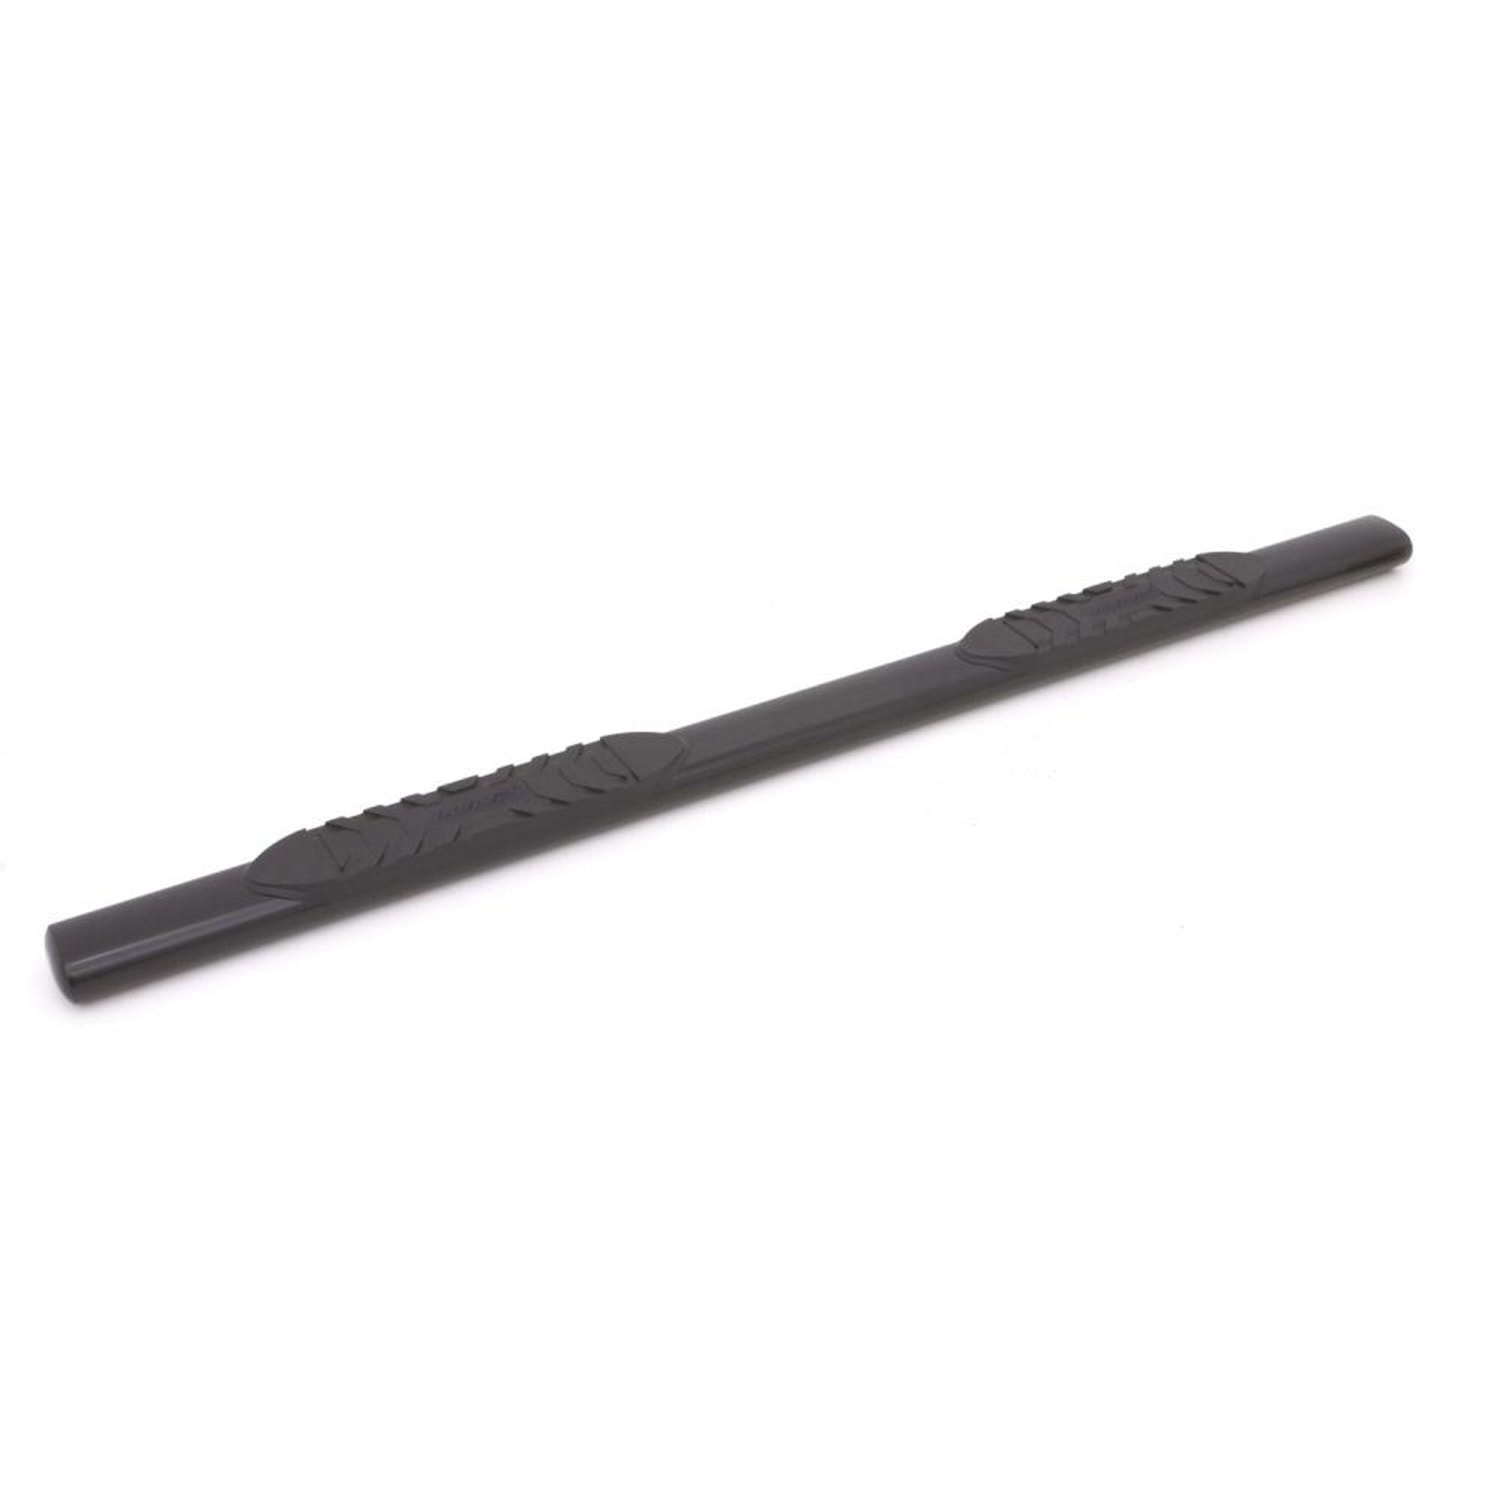 LUND 26685007 6 Inch Oval Straight Nerf Bar - Black 6 In OVAL STRAIGHT BLACK